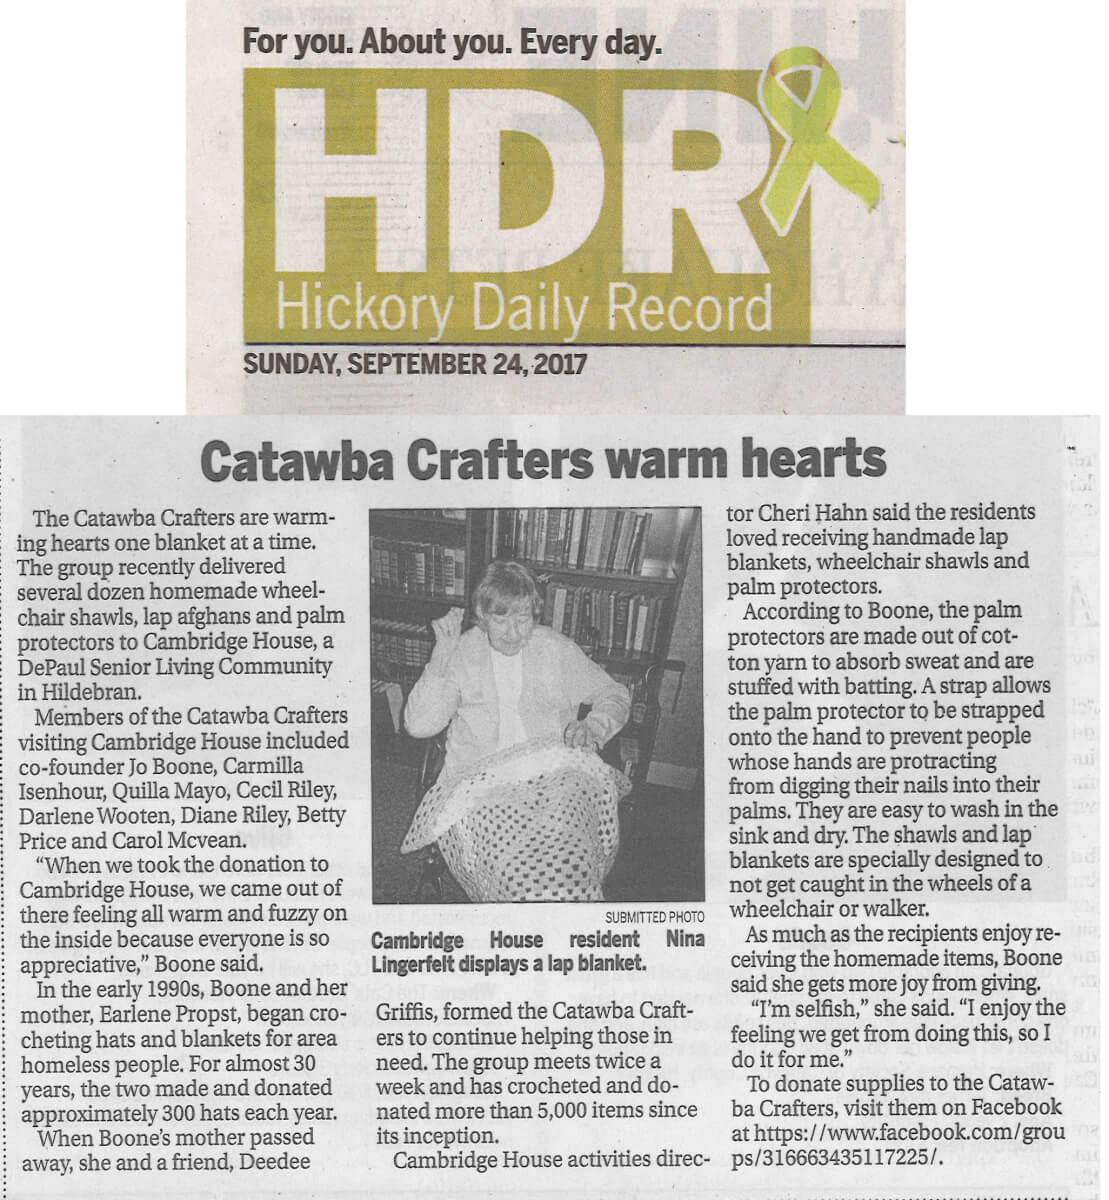 Catawba Crafters warm hearts at Cambridge House, article in the Hickory Daily Record, September 24, 2017